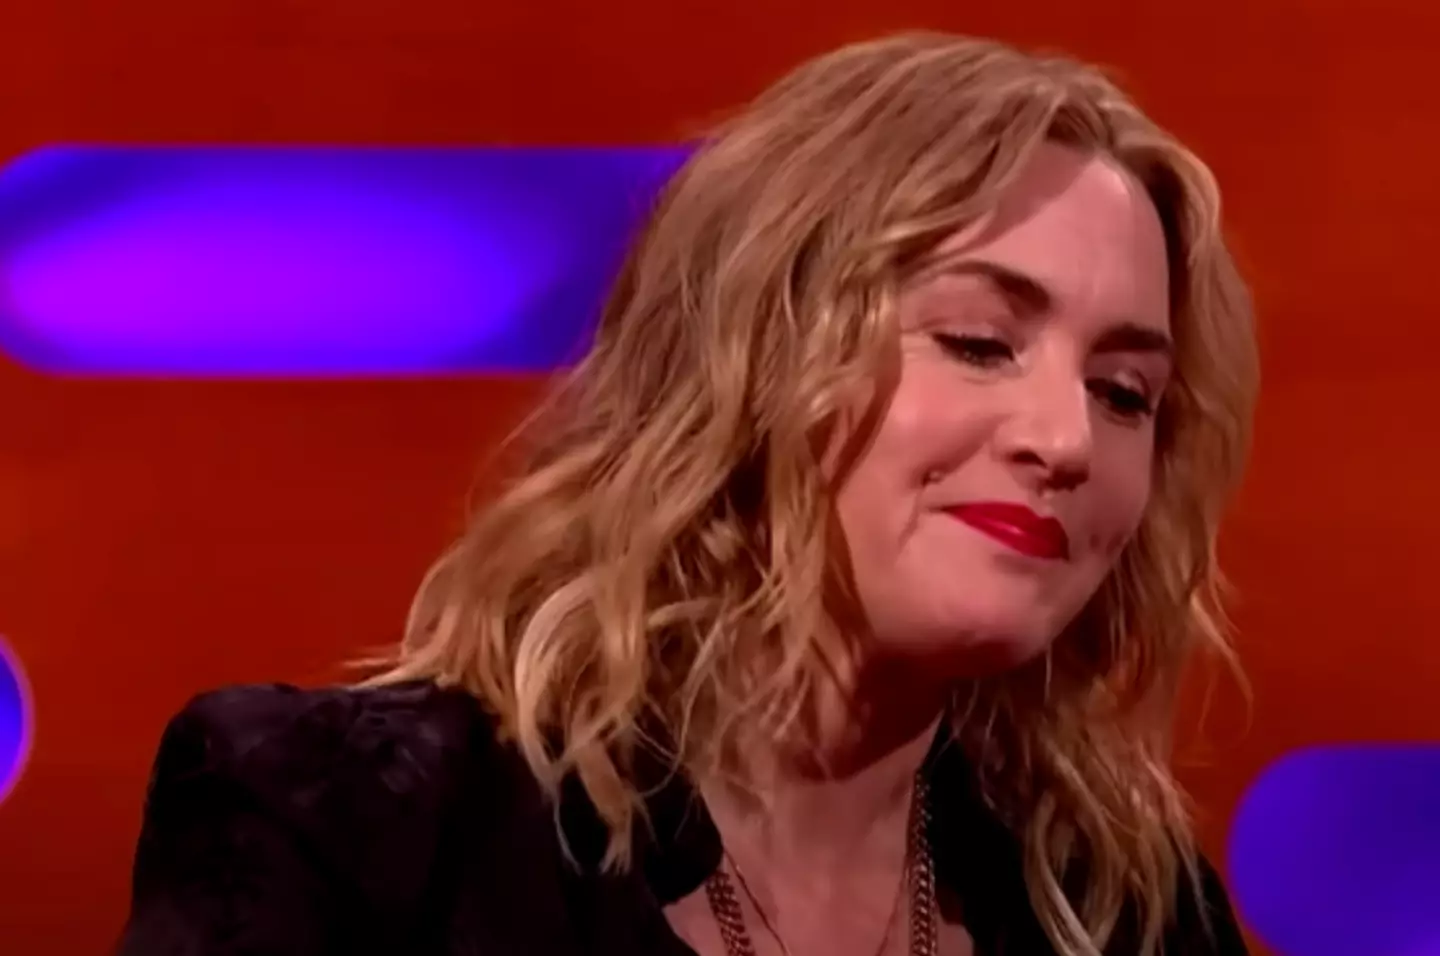 Kate Winslet has opened up about when she thought she sh*t herself on stage.